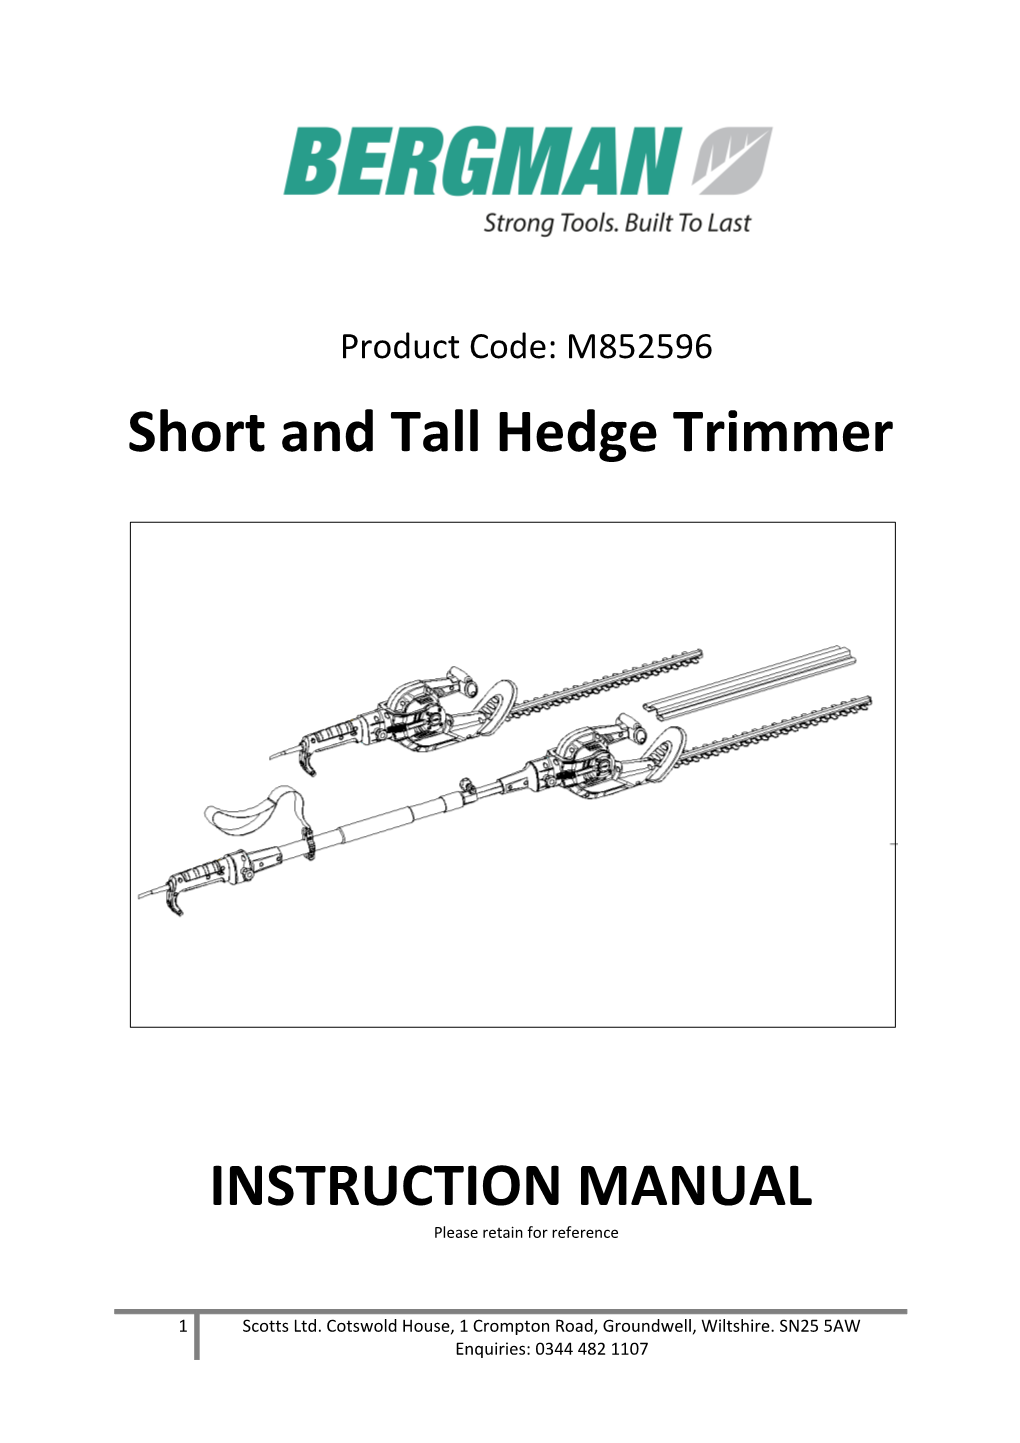 Short and Tall Hedge Trimmer